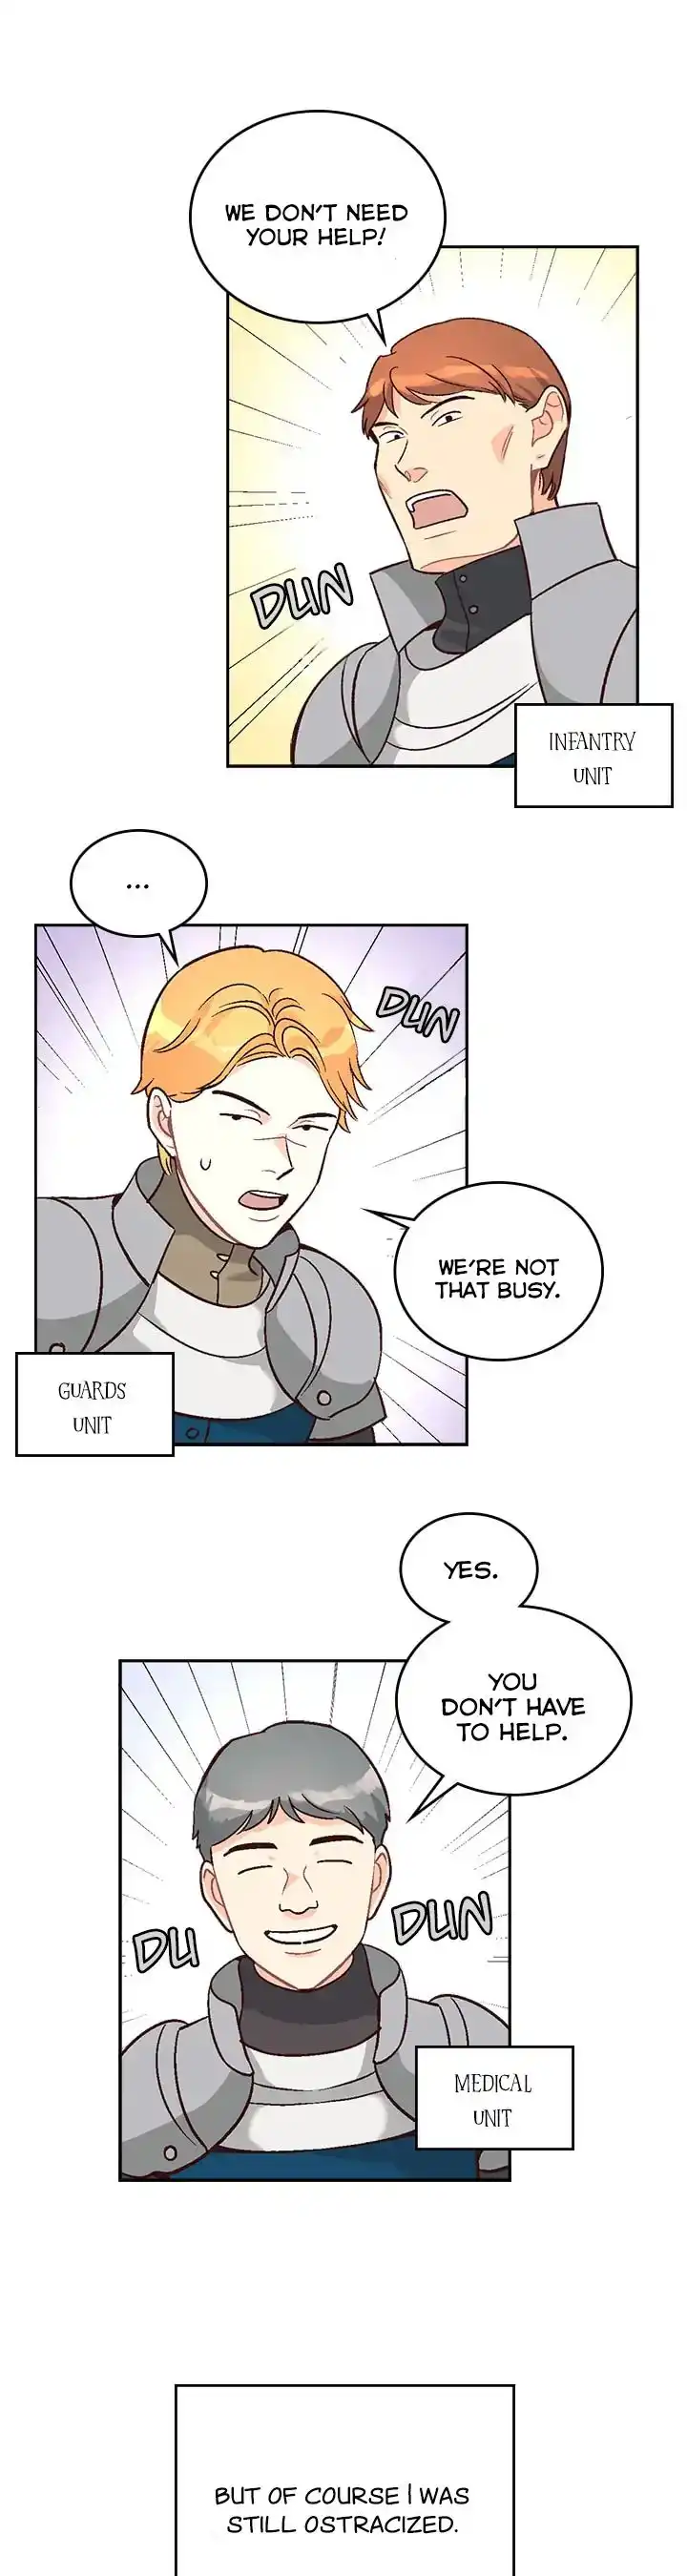 Emperor And The Female Knight Chapter 10